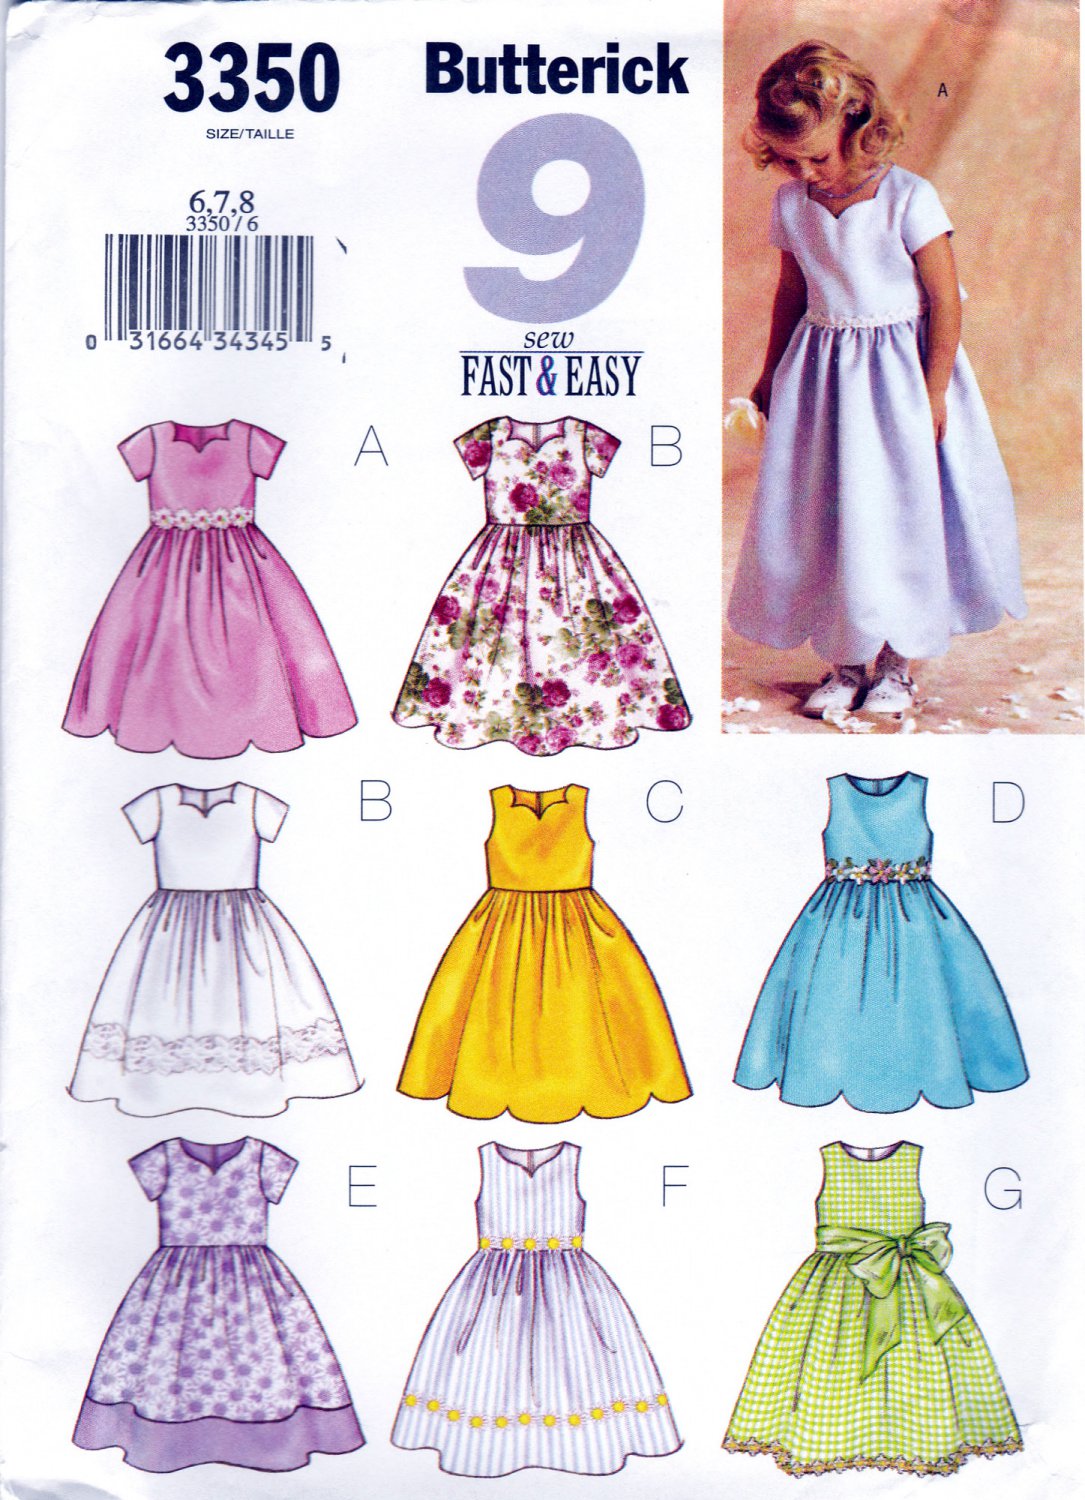 Butterick 3350 B3350 Girls Sewing Pattern Dresses 9 Looks In One Childrens Kids Sizes 6-7-8 Easy Sew